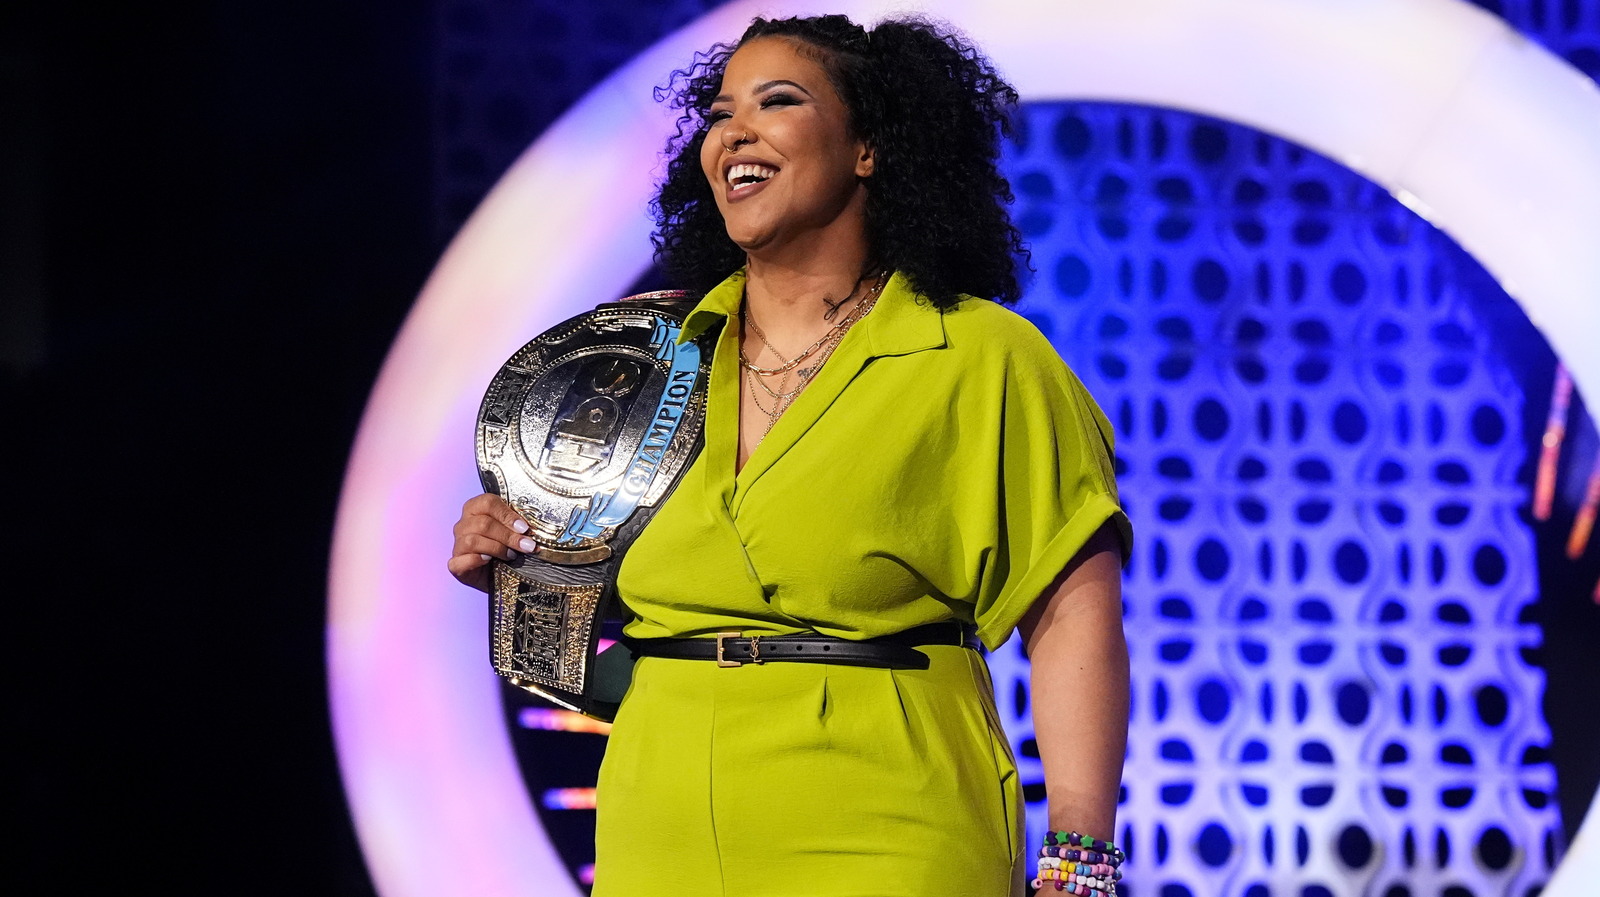 AEW TBS Champion Willow Nightingale Discusses The Impact Of Being A Role Model